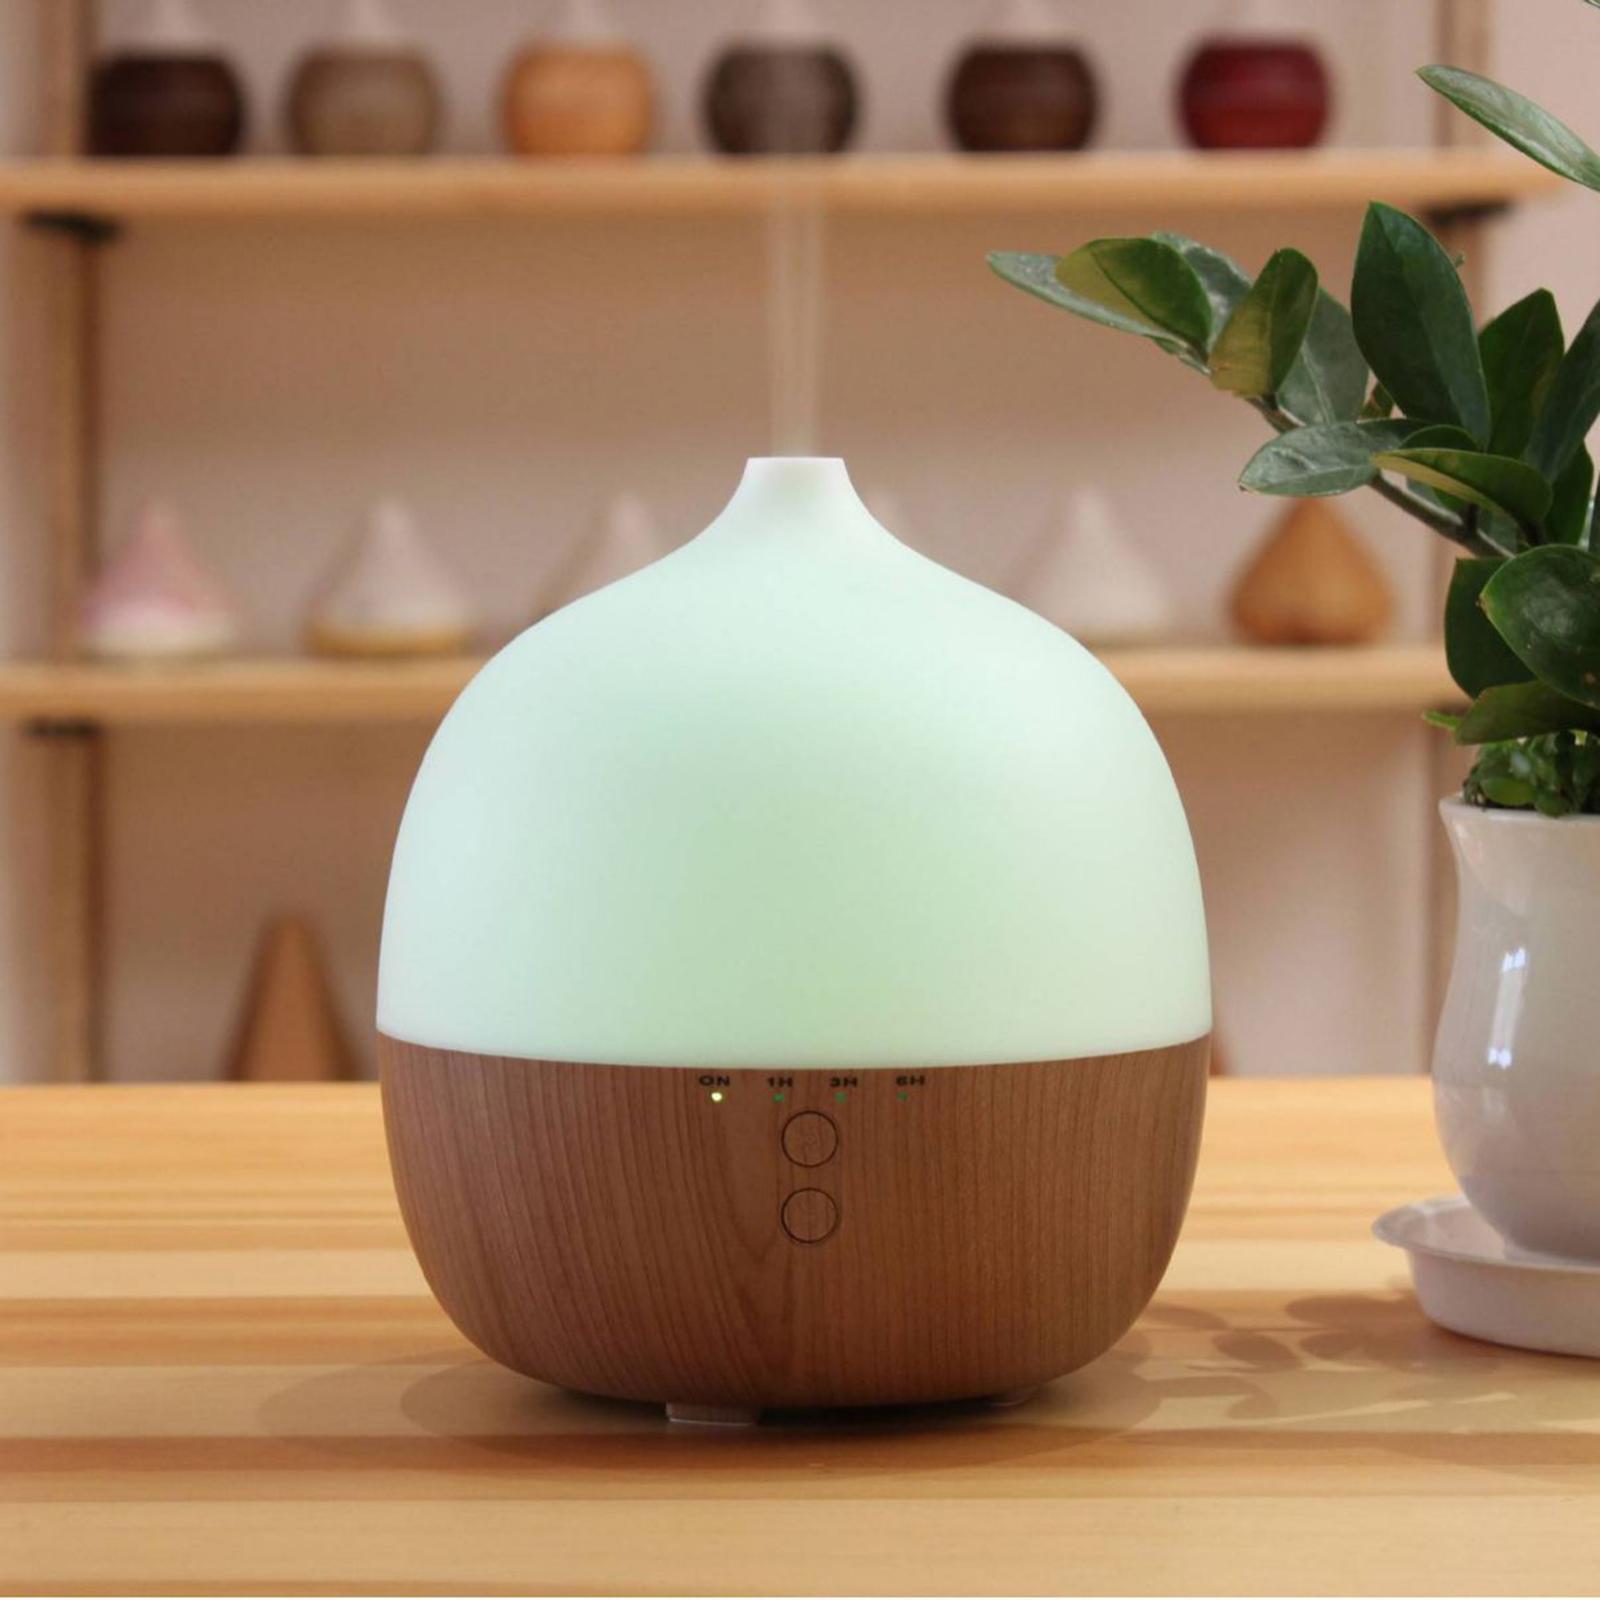 Air Humidifier Essential Oil Diffuser Aroma Diffuser for Home Office Desktop Light Wood Grain